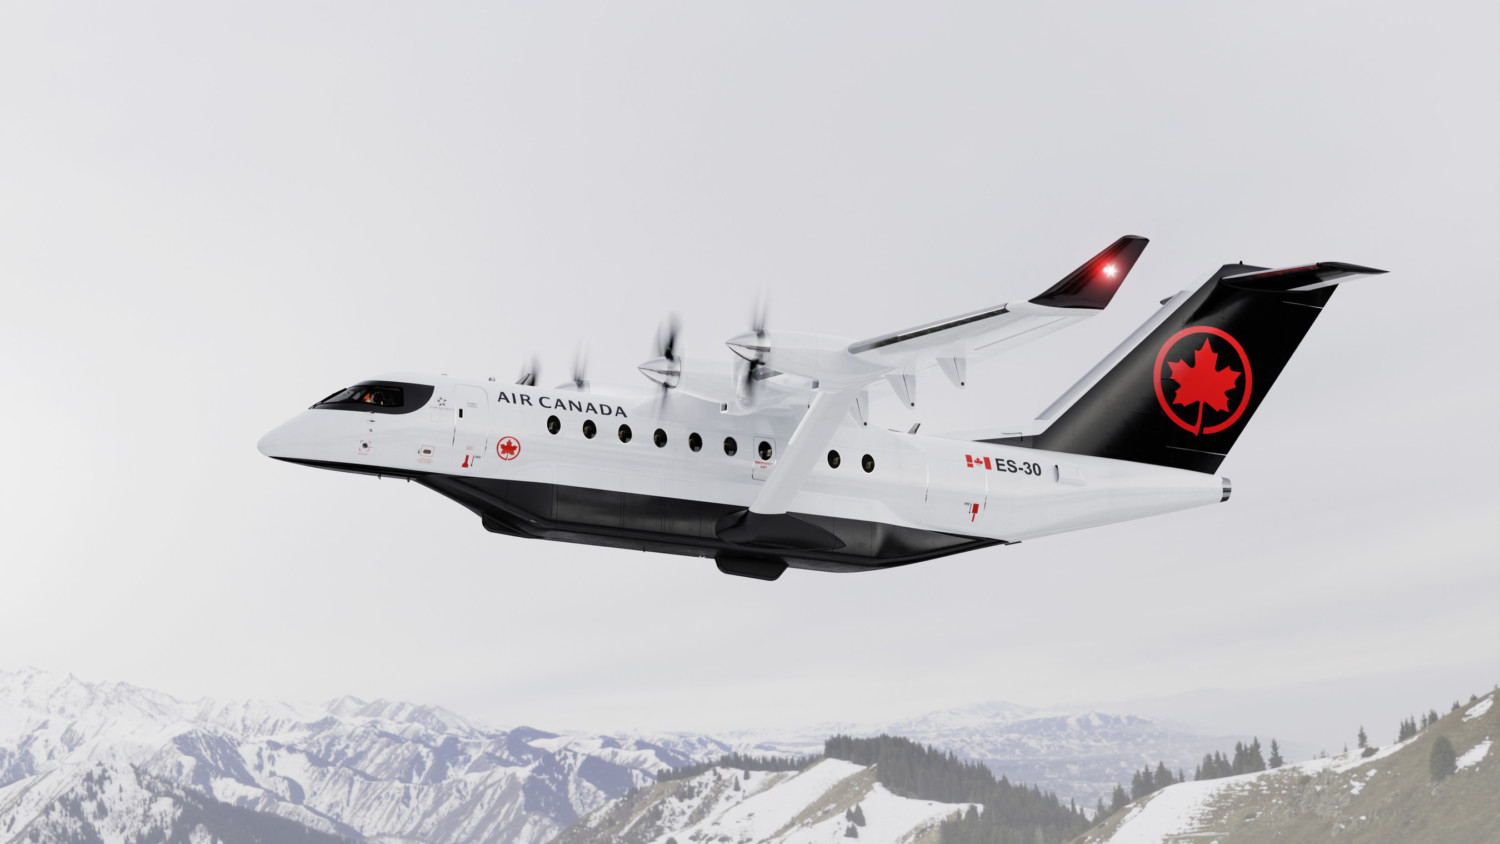 Air Canada today announced a purchase agreement for 30 ES-30 electric-hybrid aircraft under development by Heart Aerospace of Sweden.